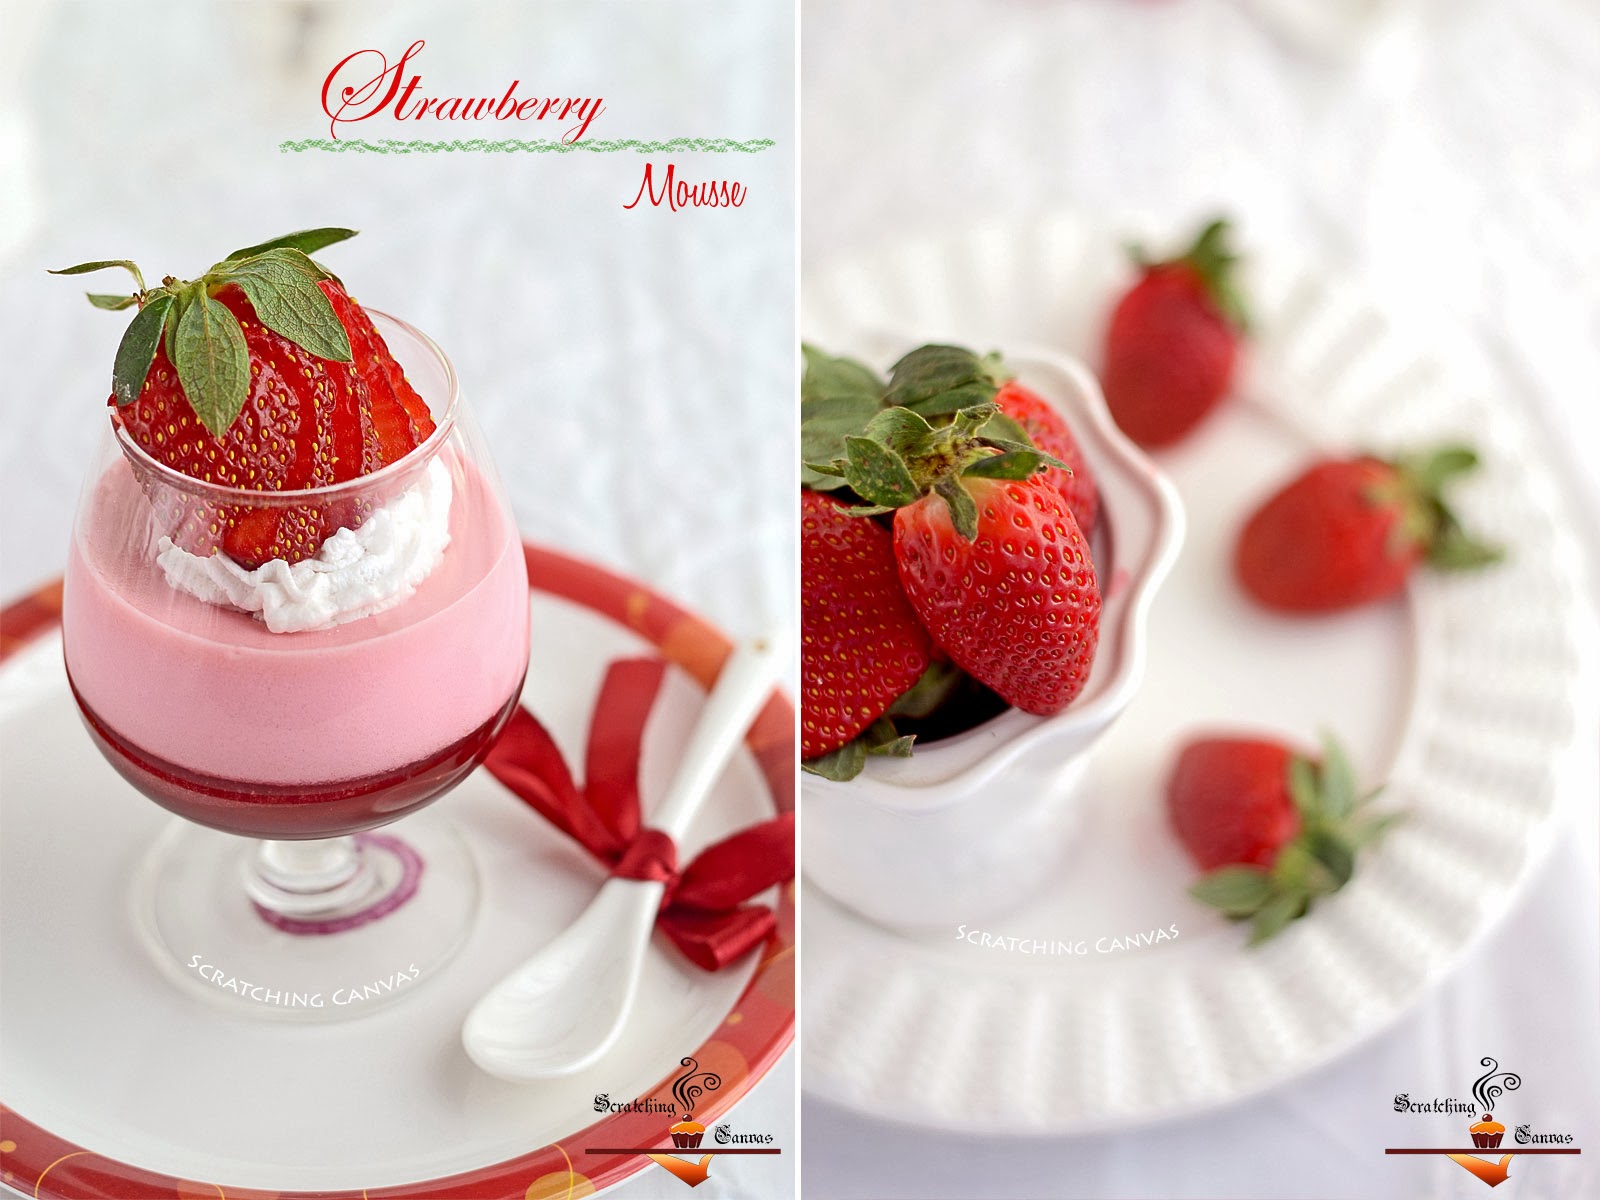 No Dairy Strawberry Mousse